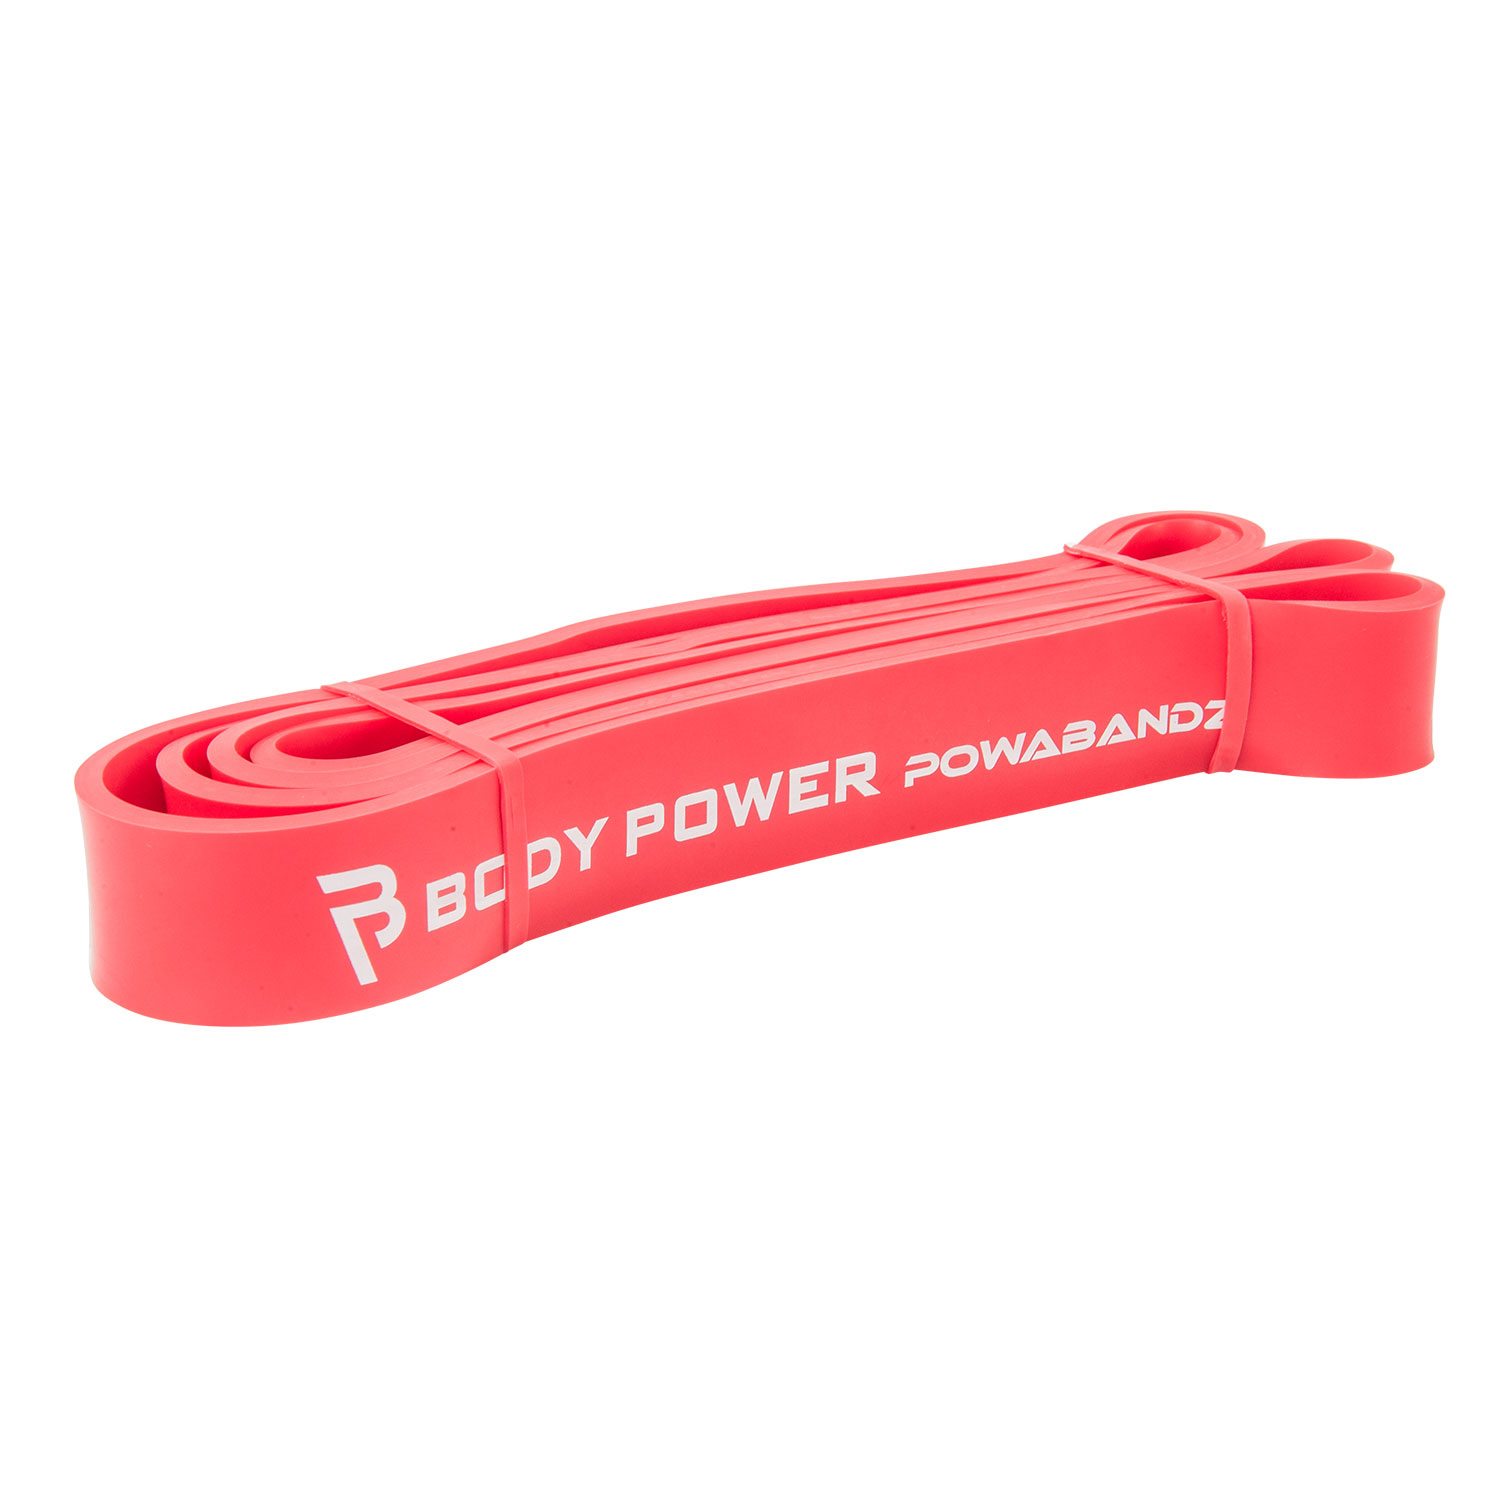 Workout Pull Up BodyPower™ Powabandz Resistance Power Band Loop for Stretching